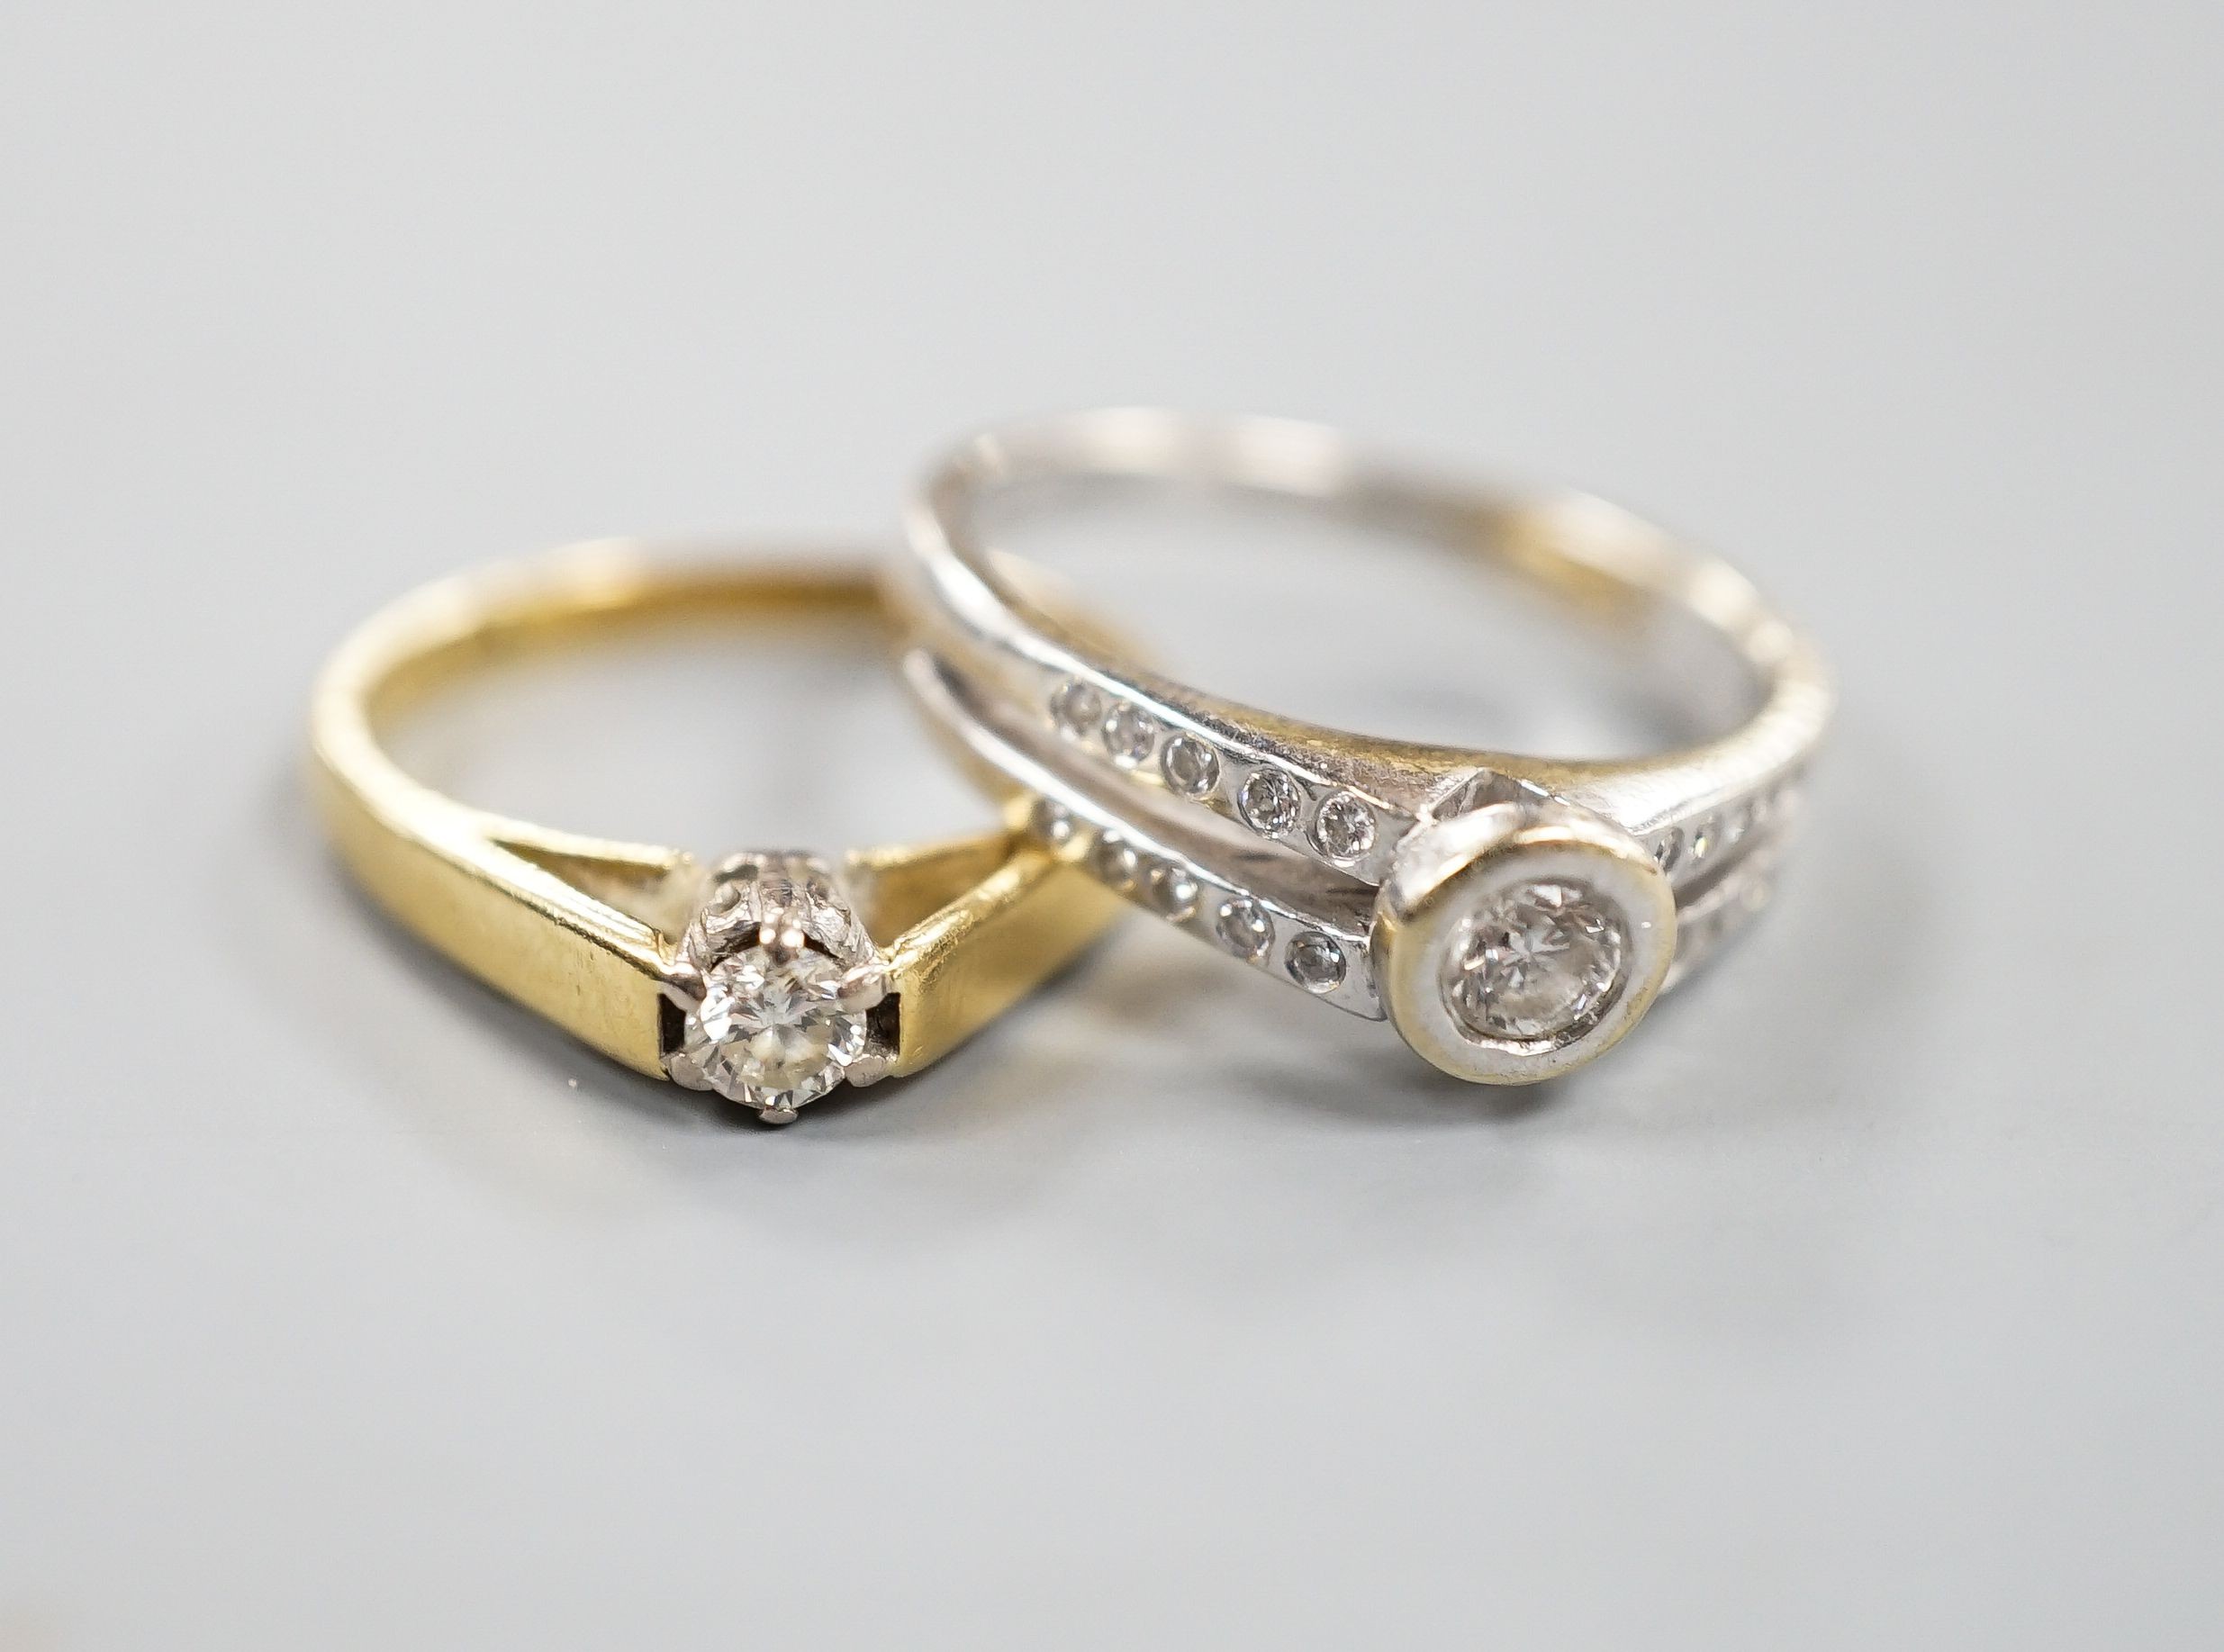 Two 18ct gold and diamond rings, including solitaire and white gold single stone, with diamond set shoulders, sizes, K & M, gross 6.5 grams.